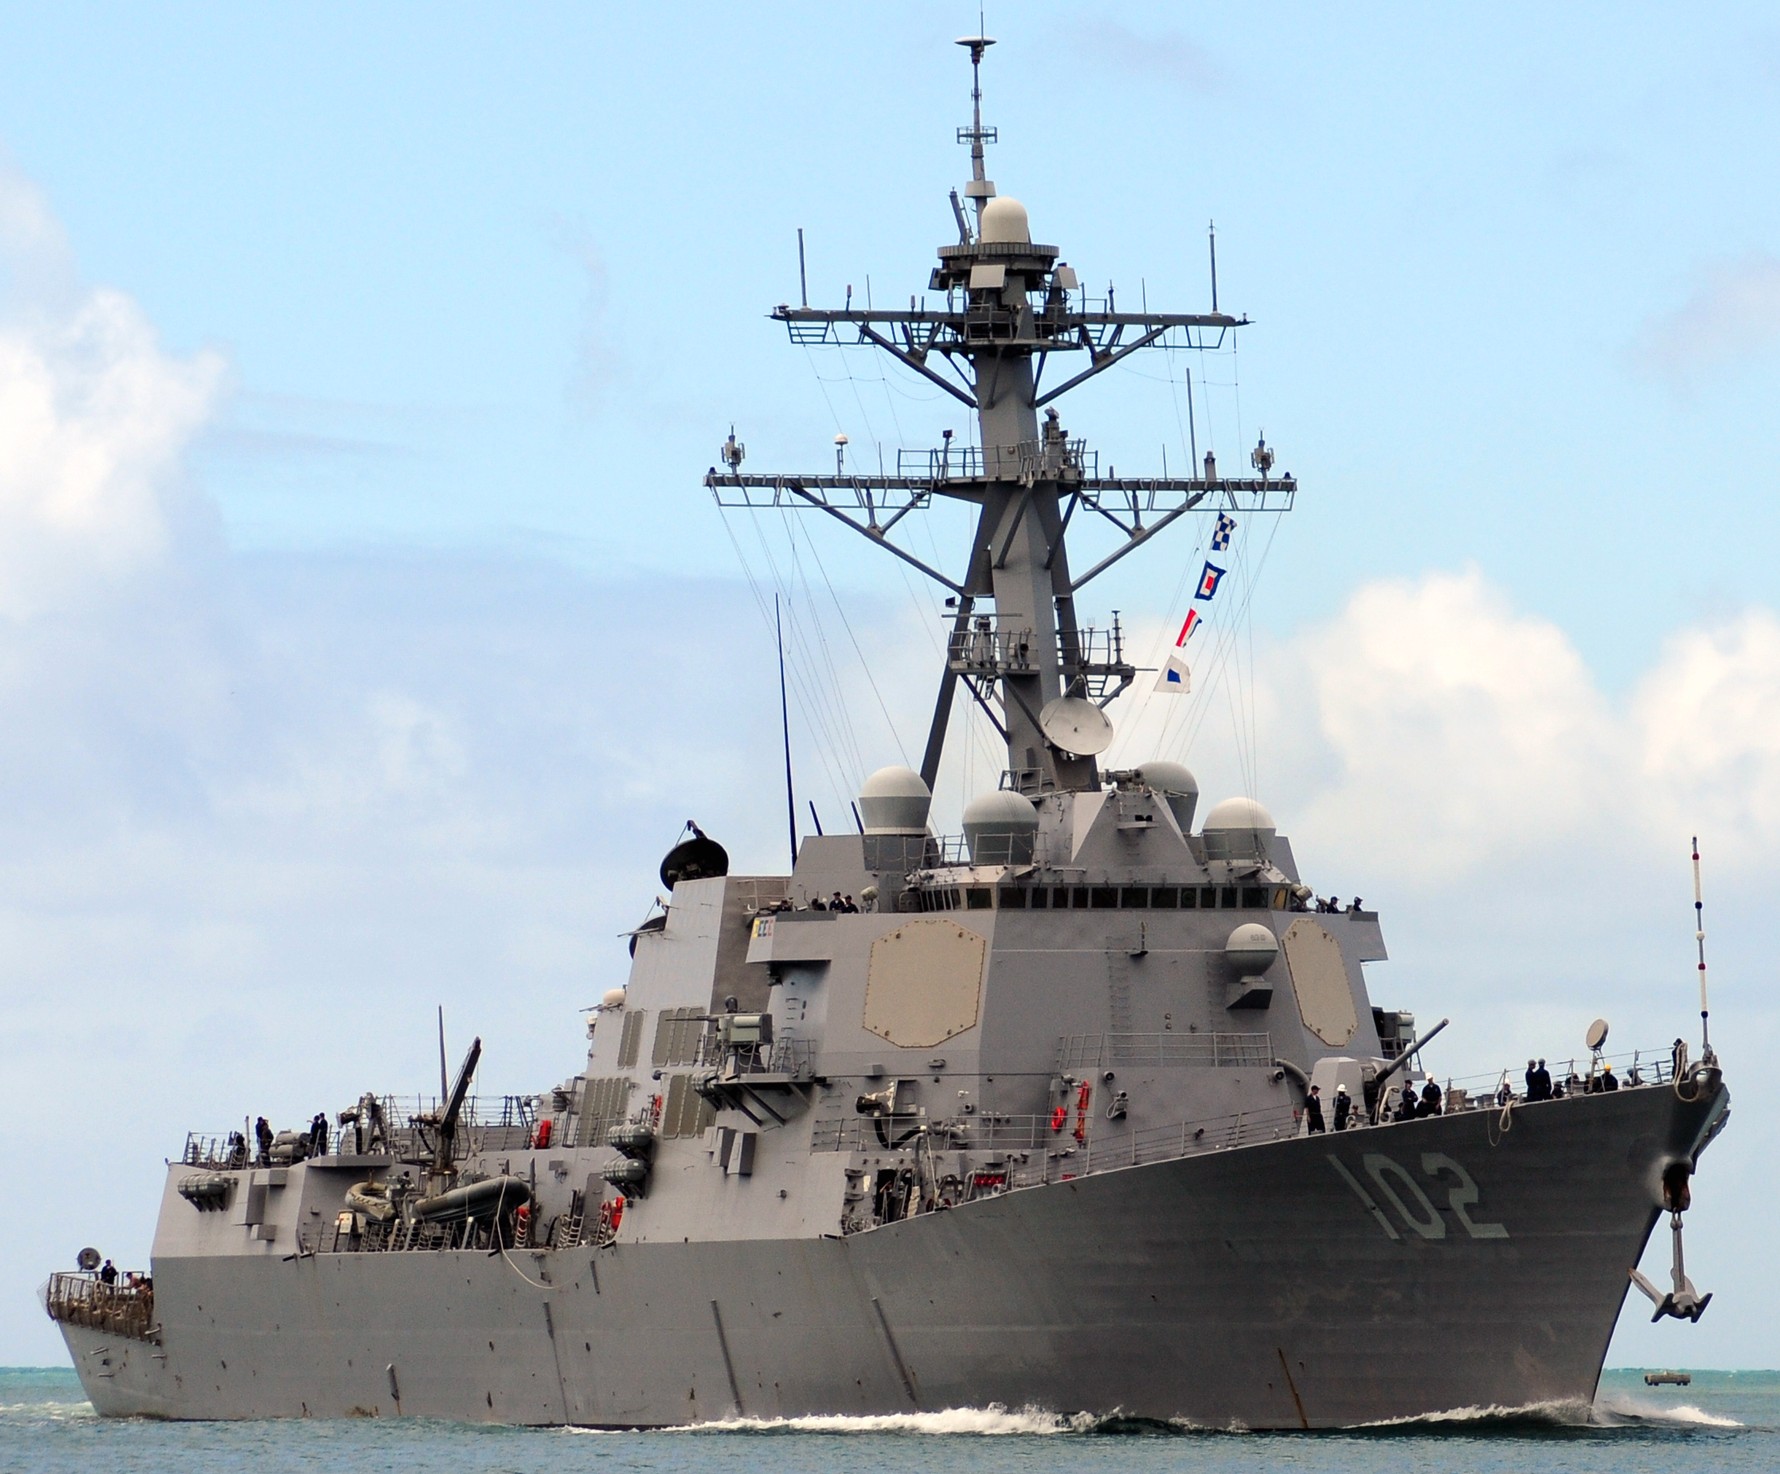 ddg-102 uss sampson arleigh burke class guided missile destroyer aegis us navy naval station pearl harbor hawaii 30